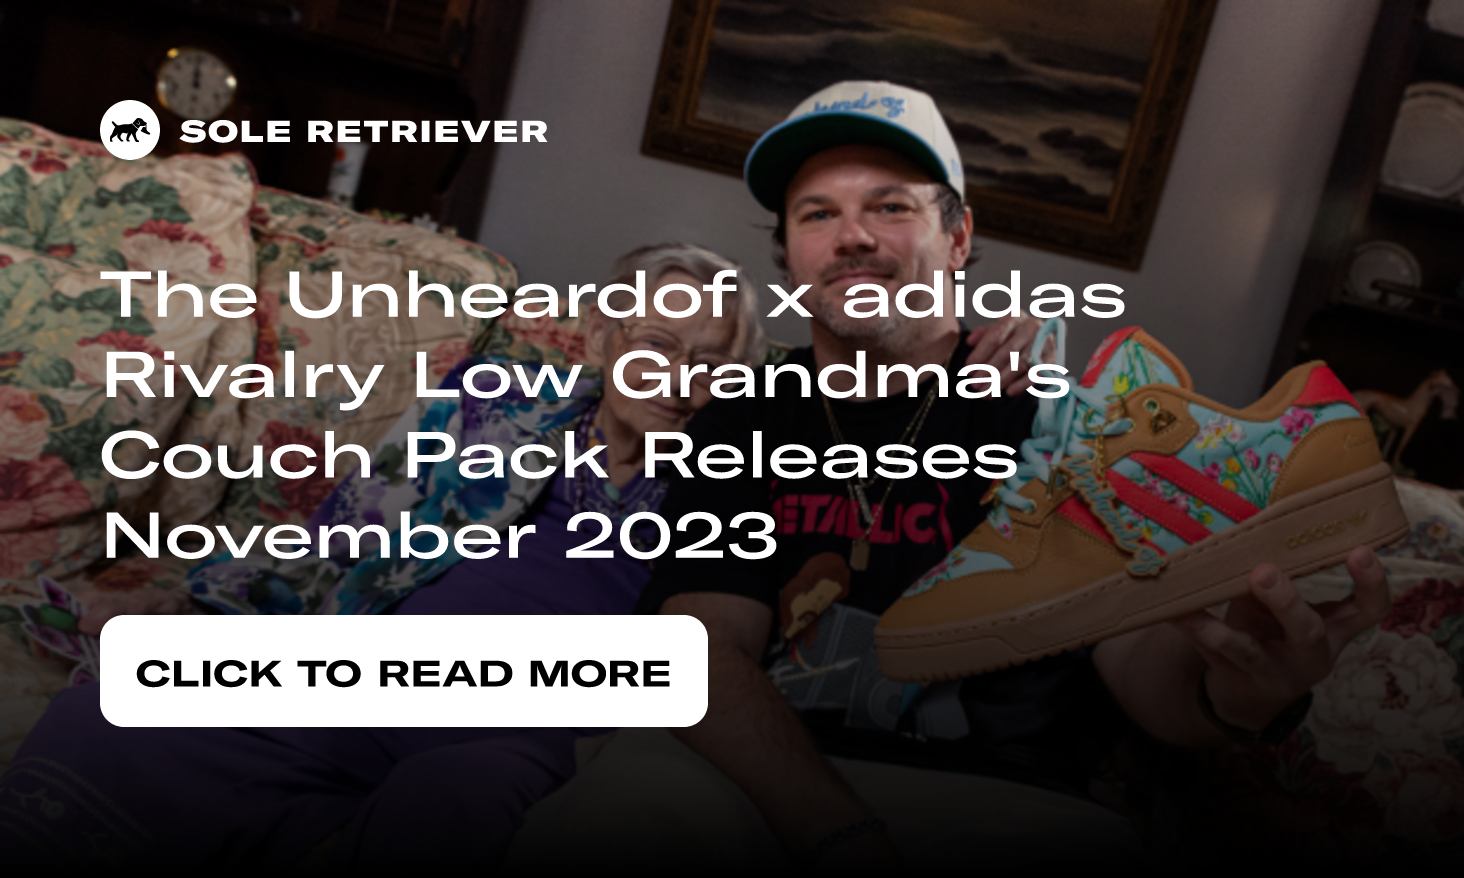 The Unheardof x adidas Rivalry Low Grandma's Couch Pack Releases November  2023